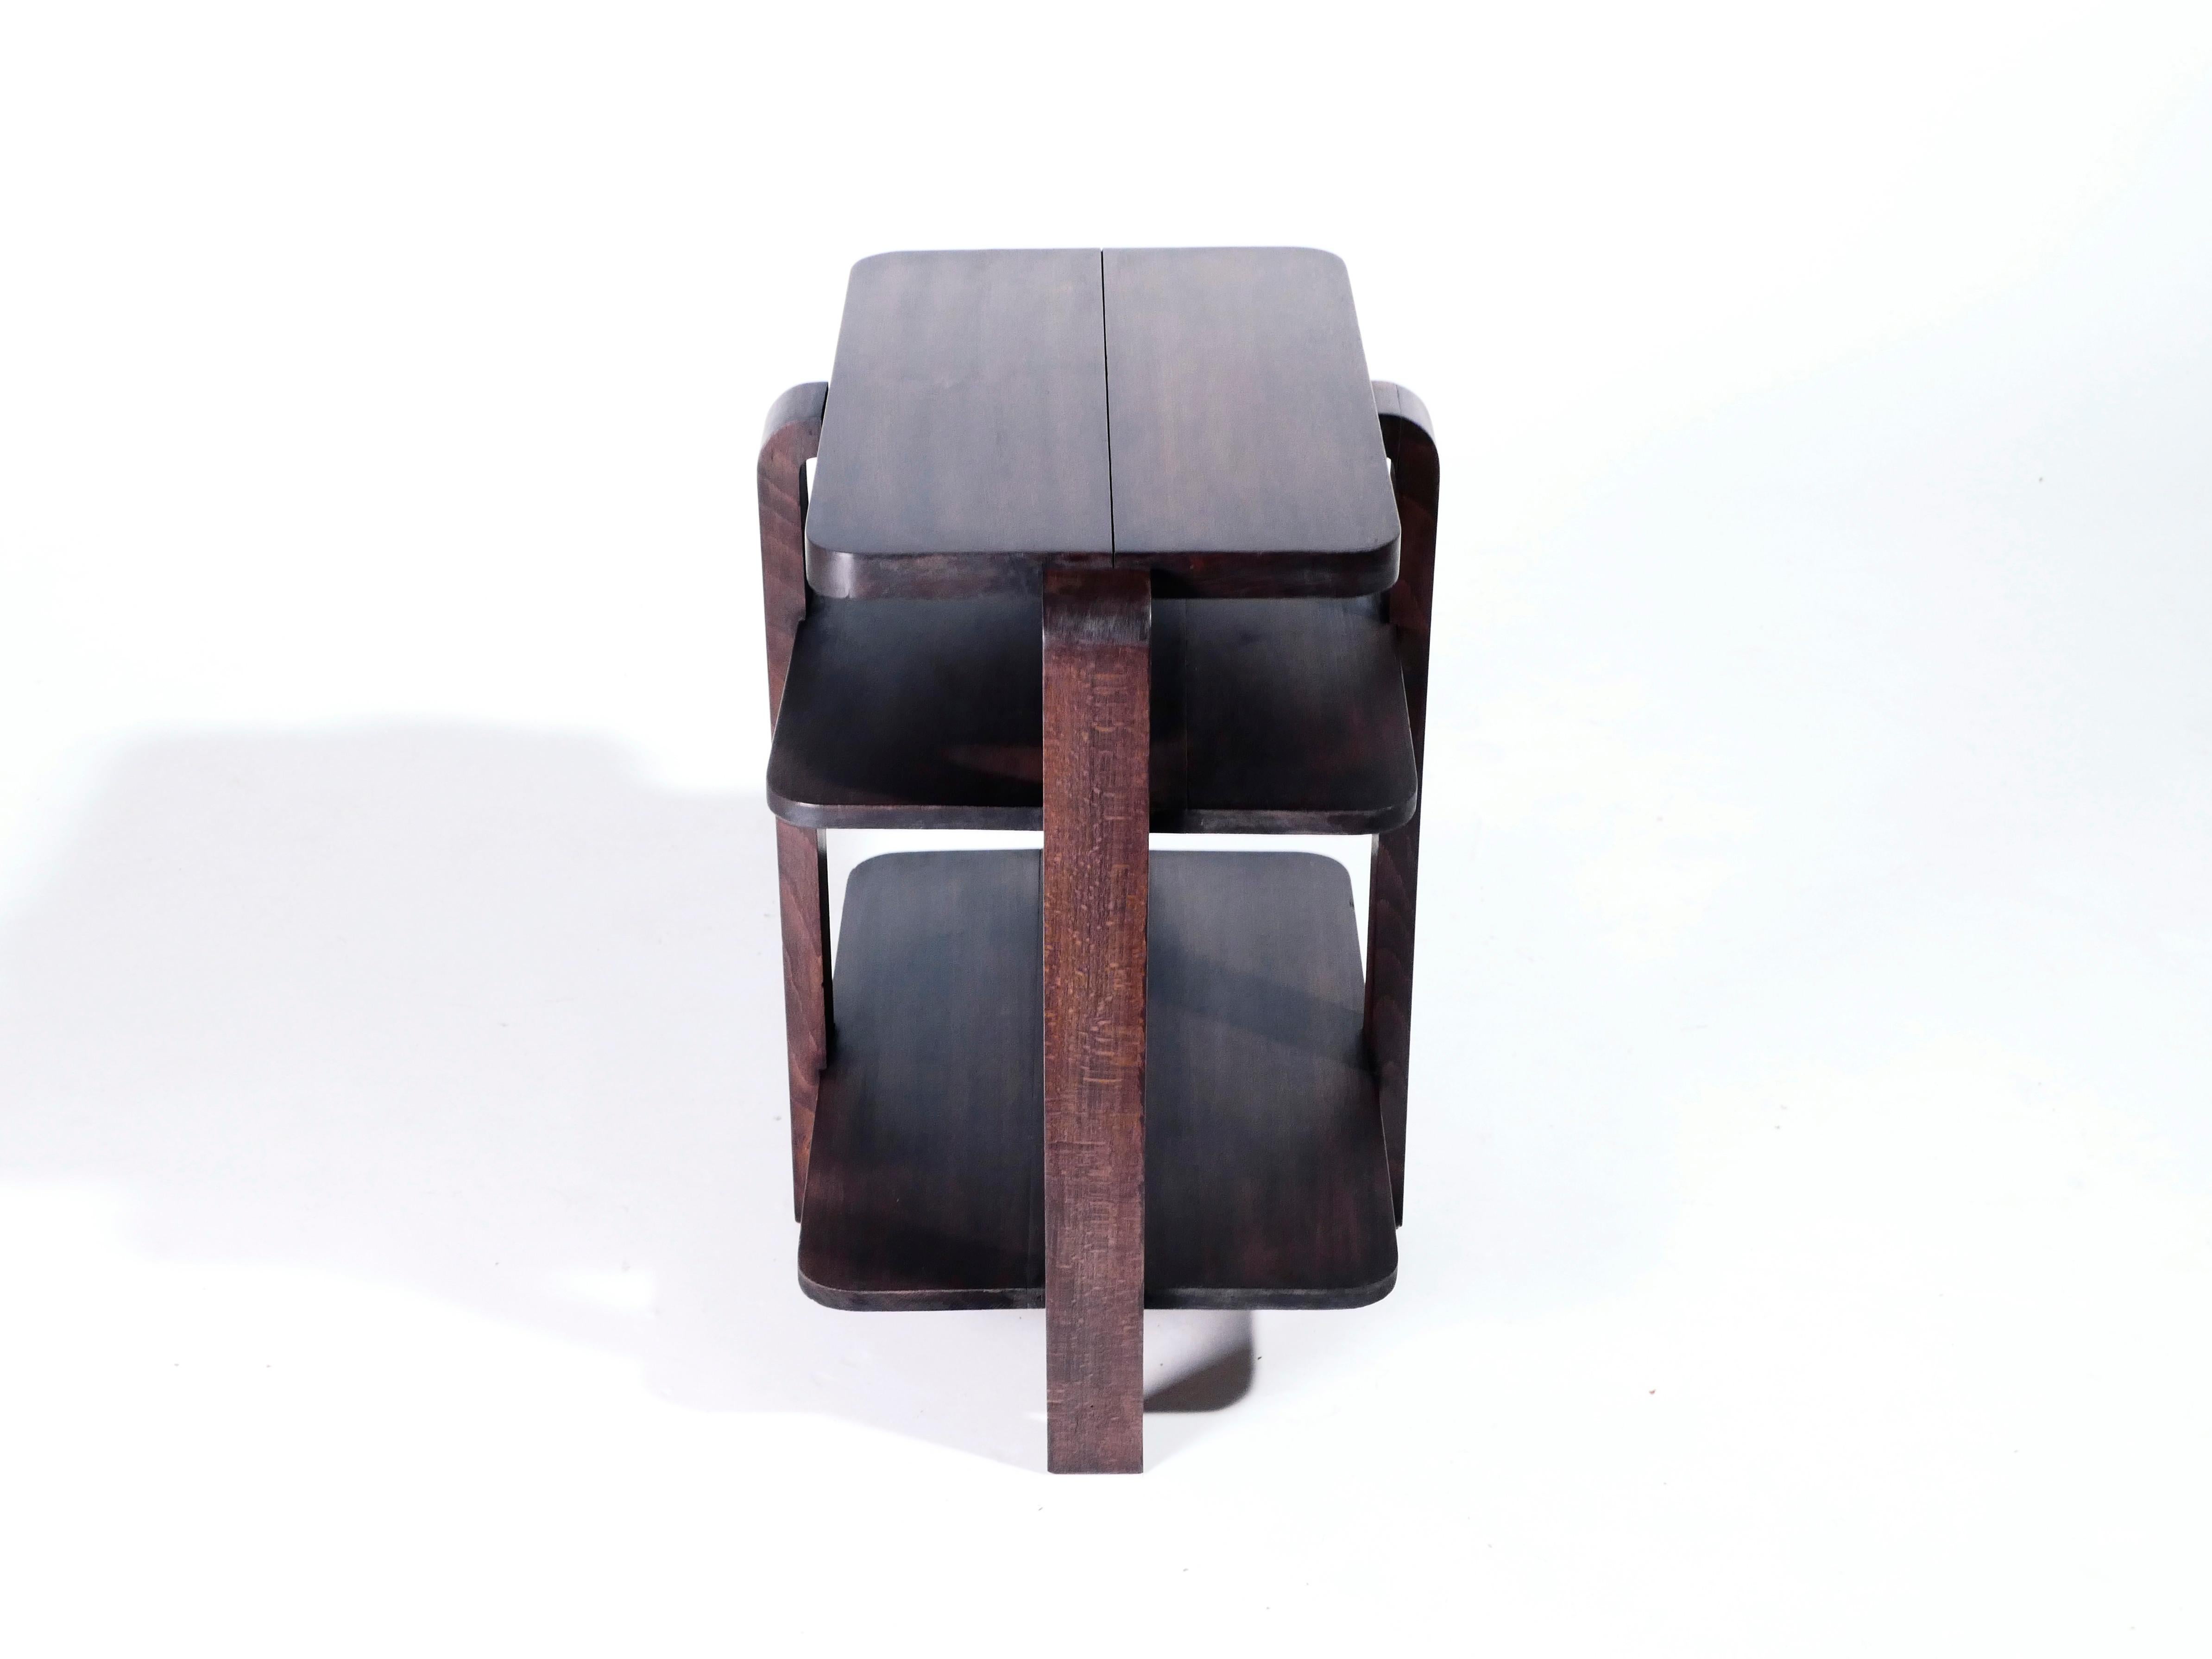 French Art Deco Modernist Mahogany Side Table, 1940s For Sale 2